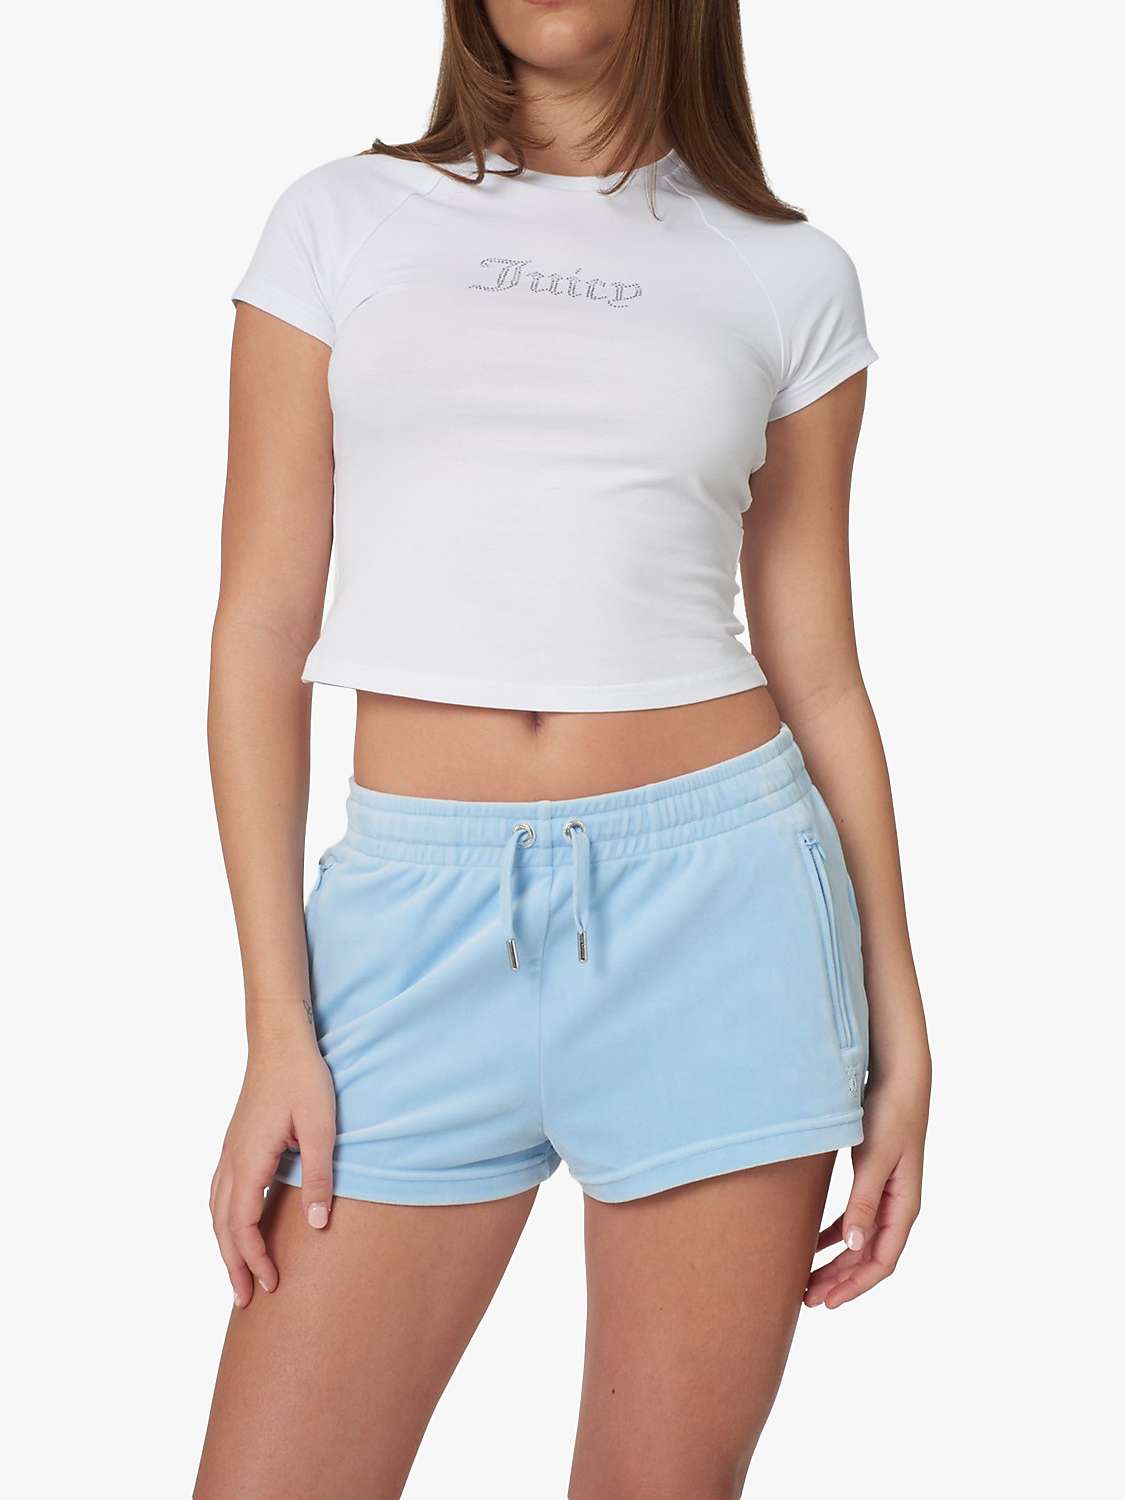 Buy Juicy Couture Diamante Embellished Velour Track Shorts, Powder Blue Online at johnlewis.com